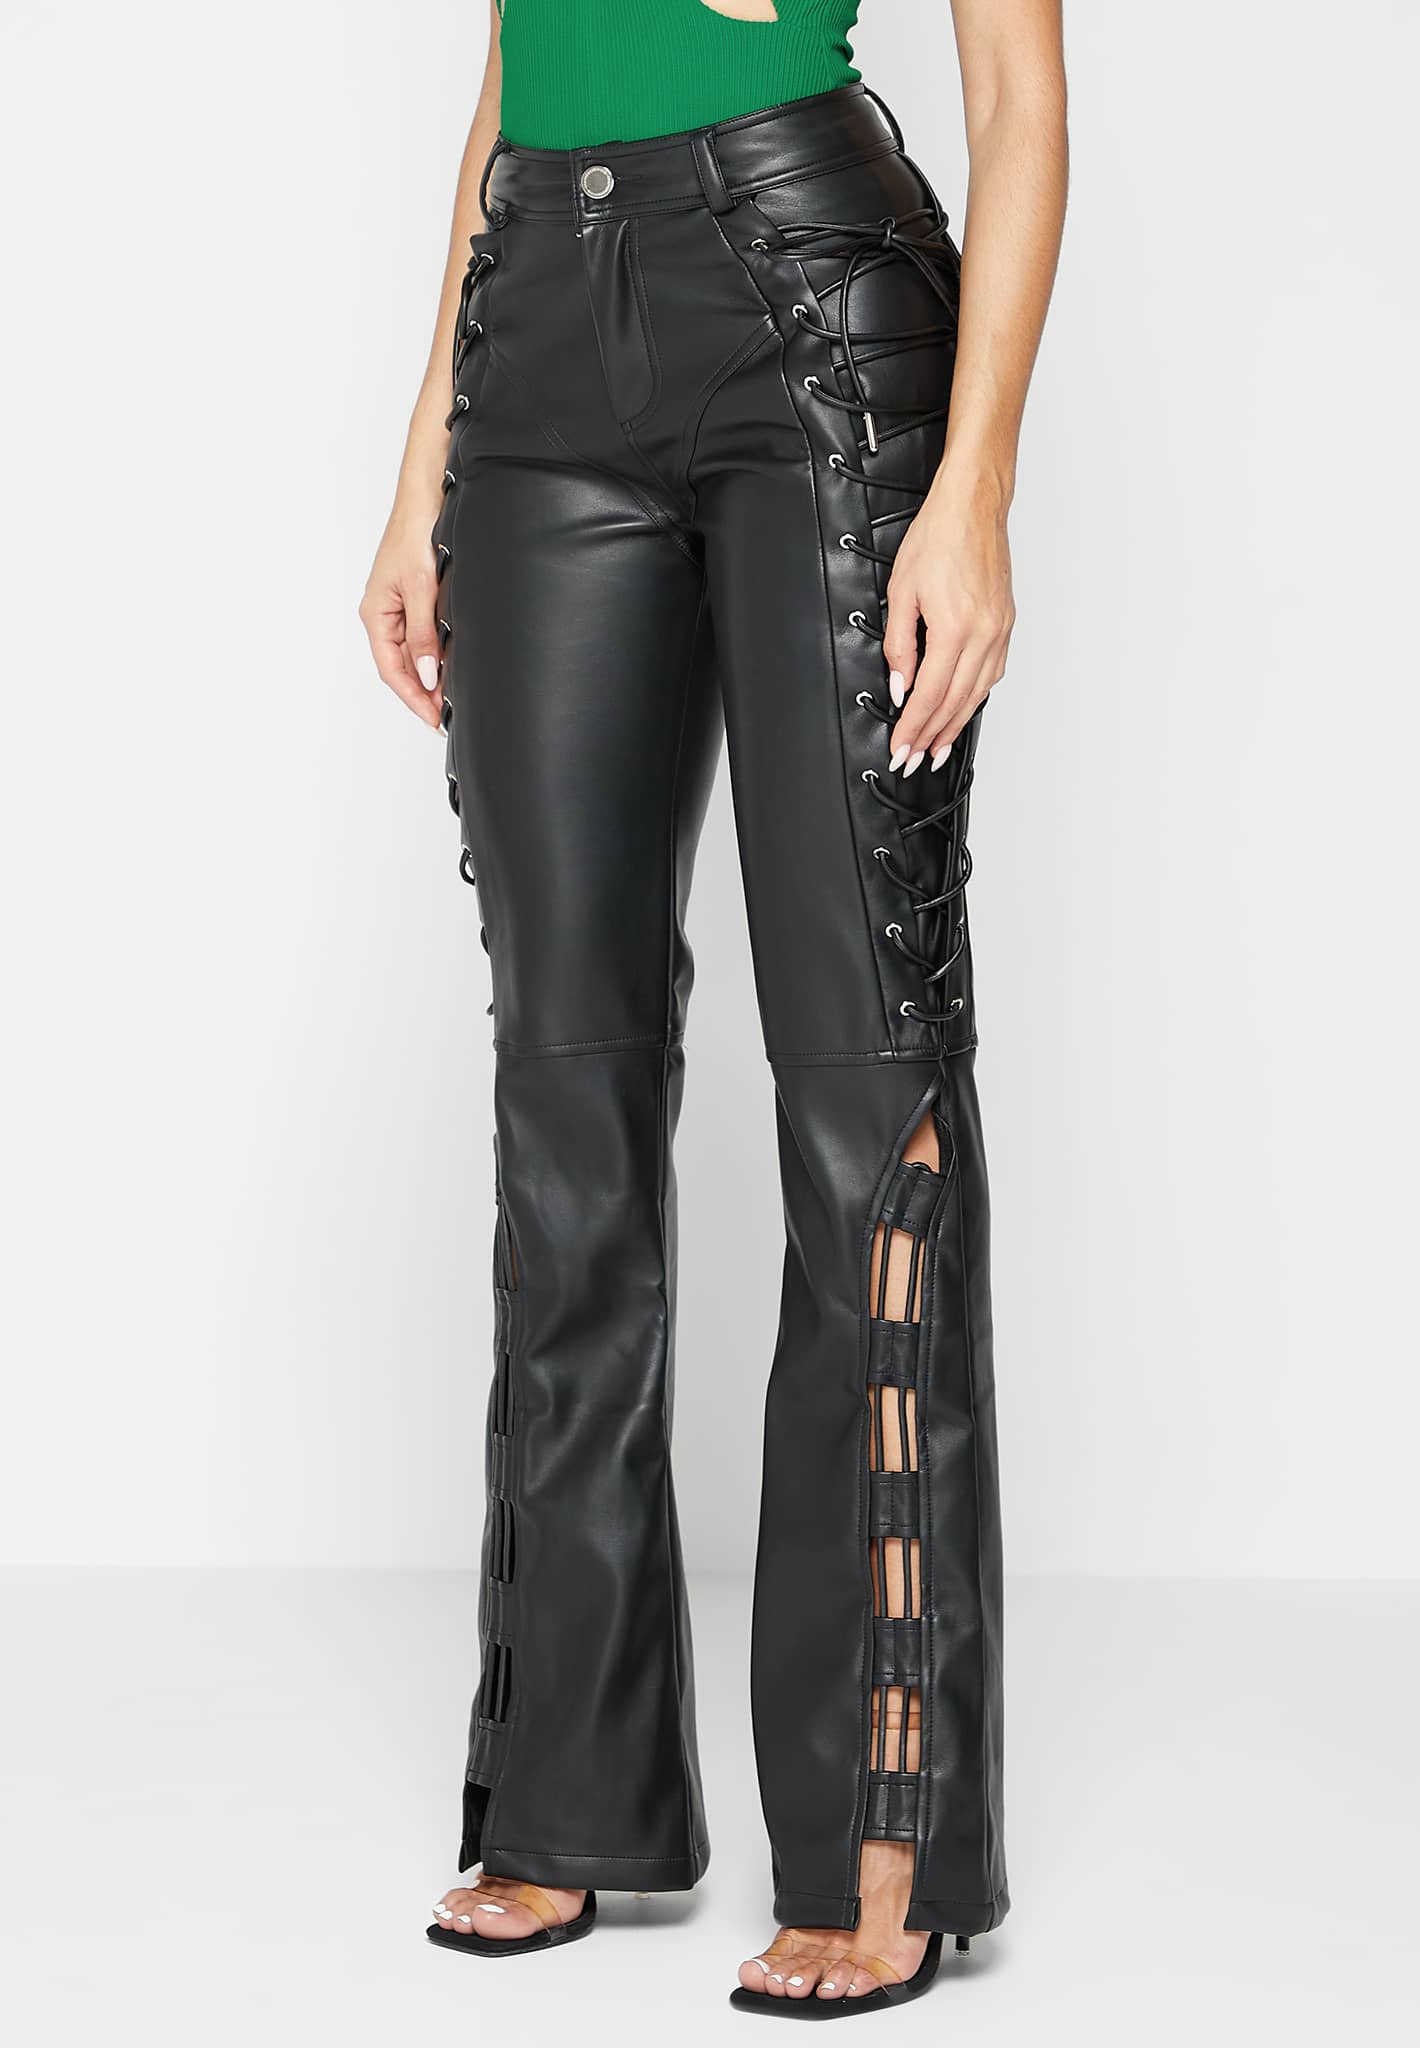 Black Leather Pants To Wear This Fall 2019 | Black leather pants, Black  leather pants outfit, Leather pants outfit